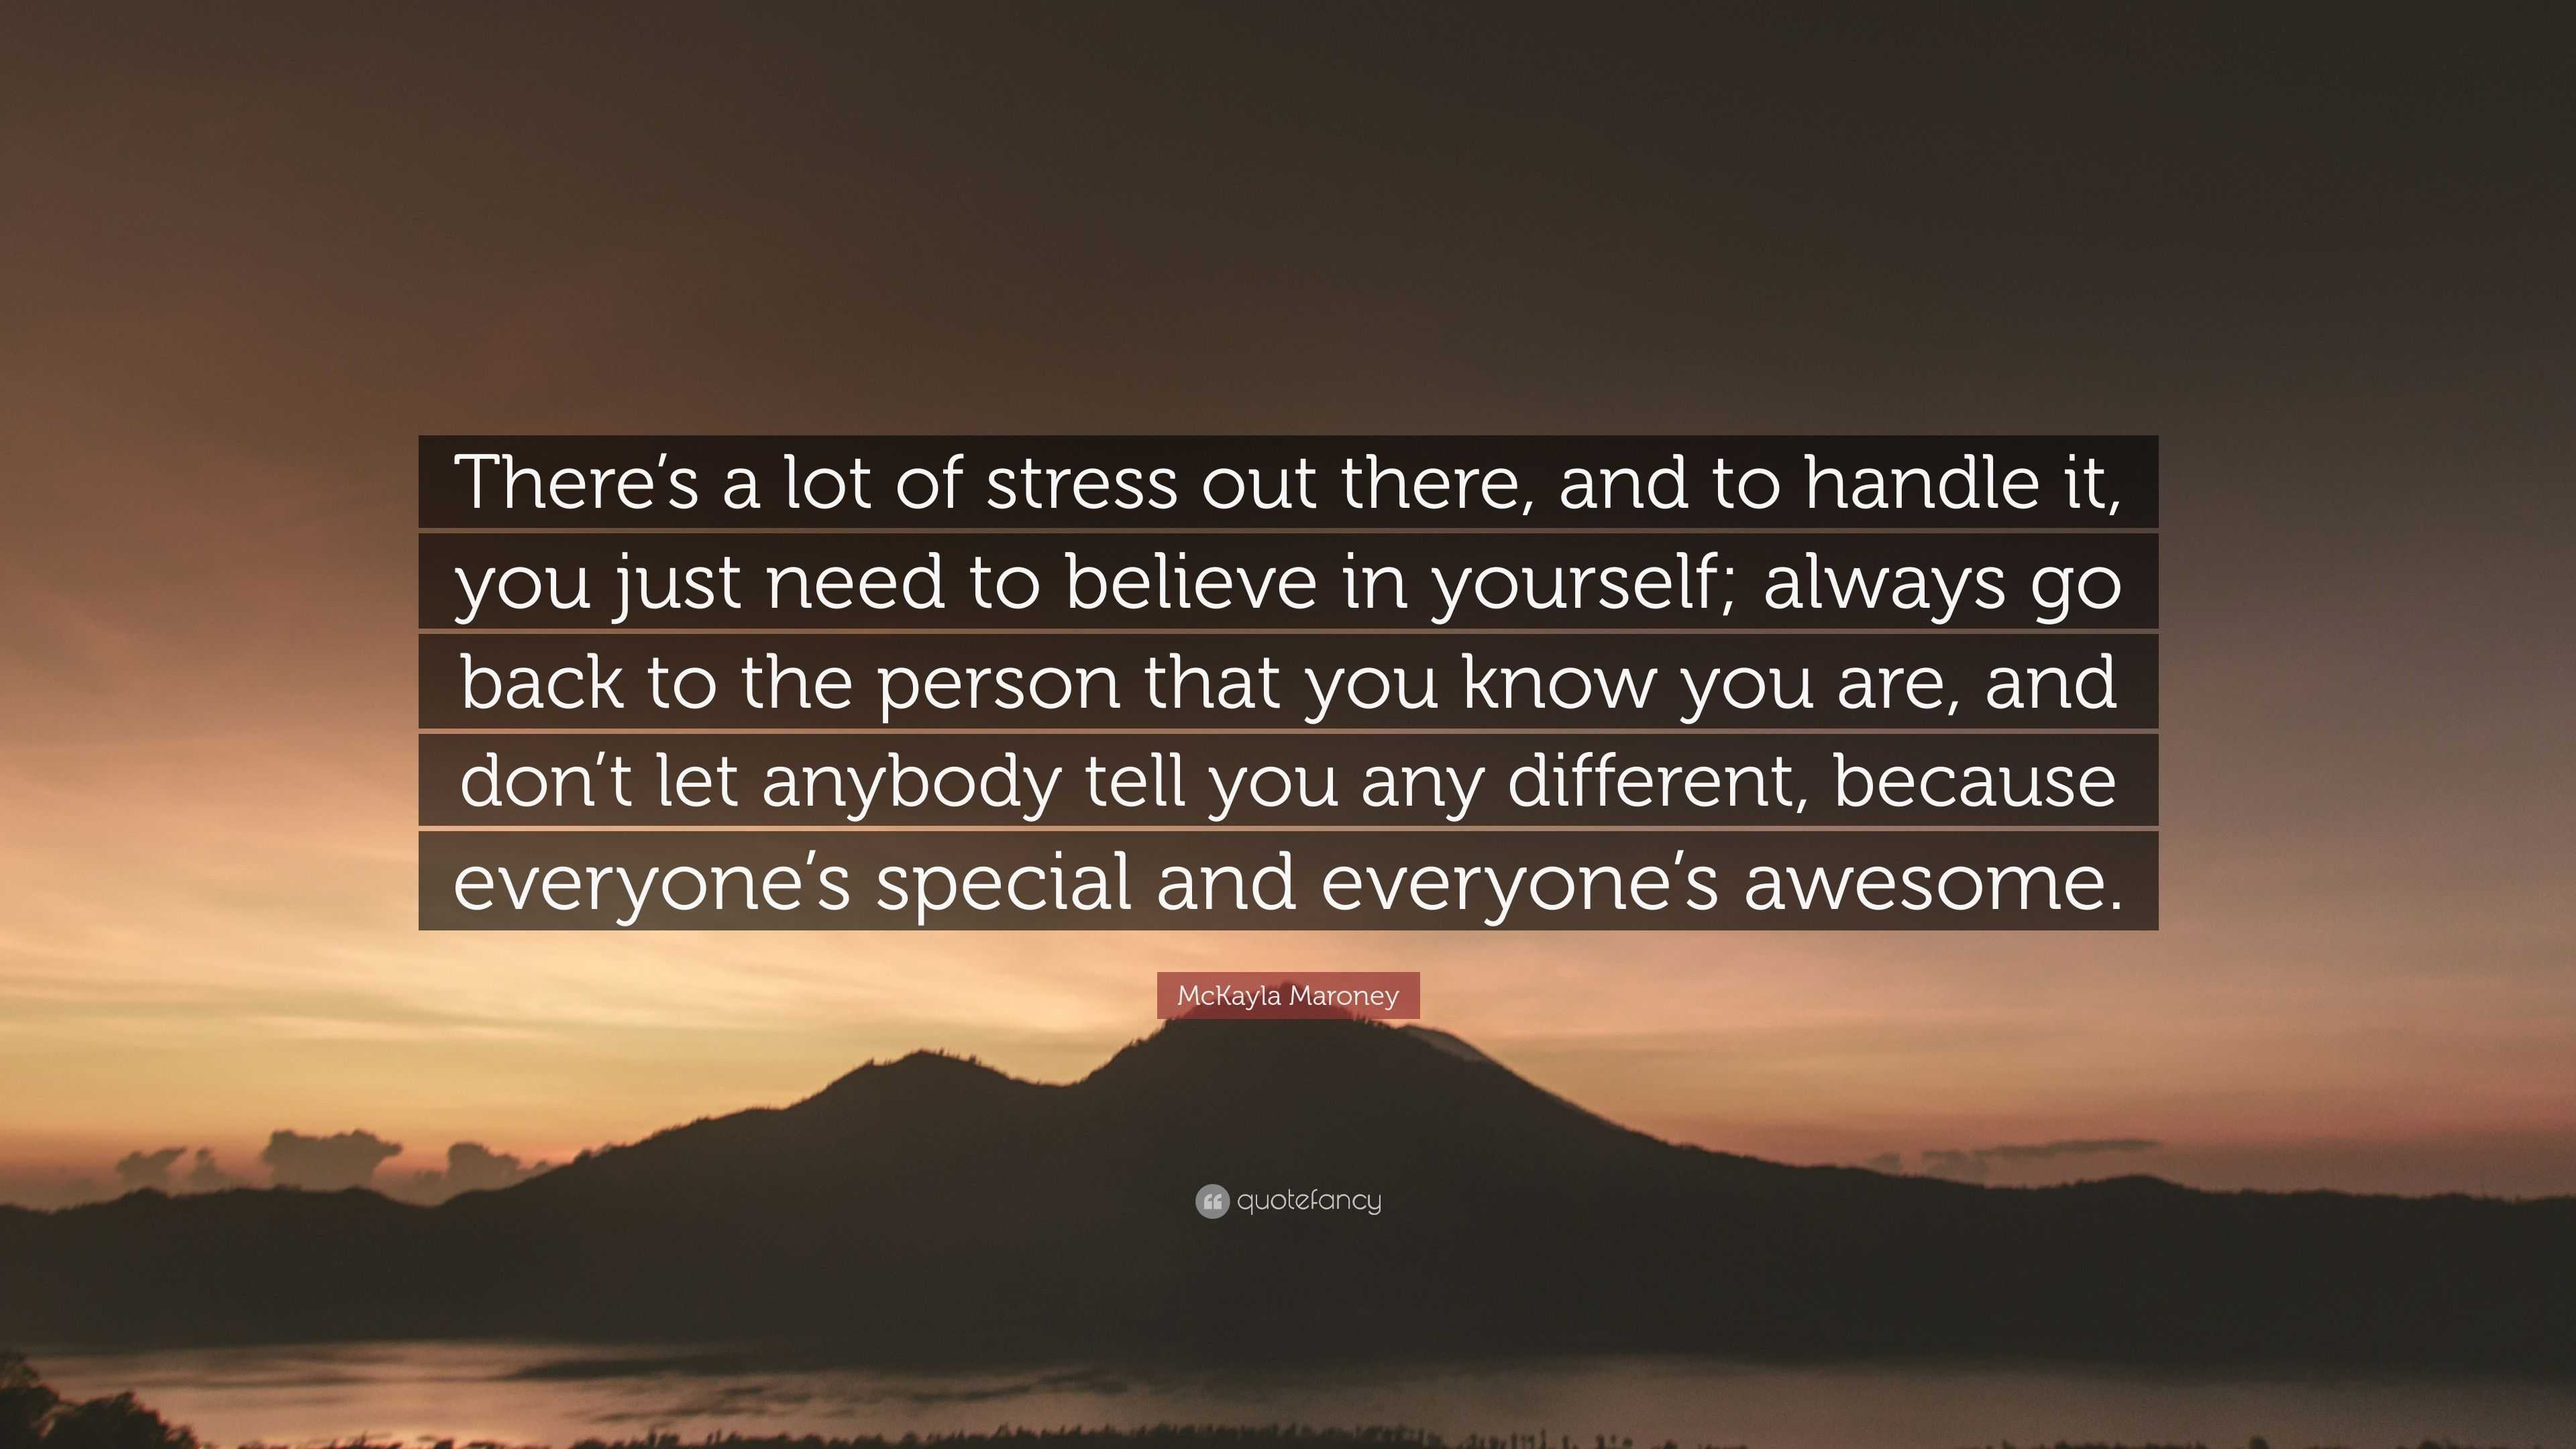 McKayla Maroney Quote: “There’s a lot of stress out there, and to